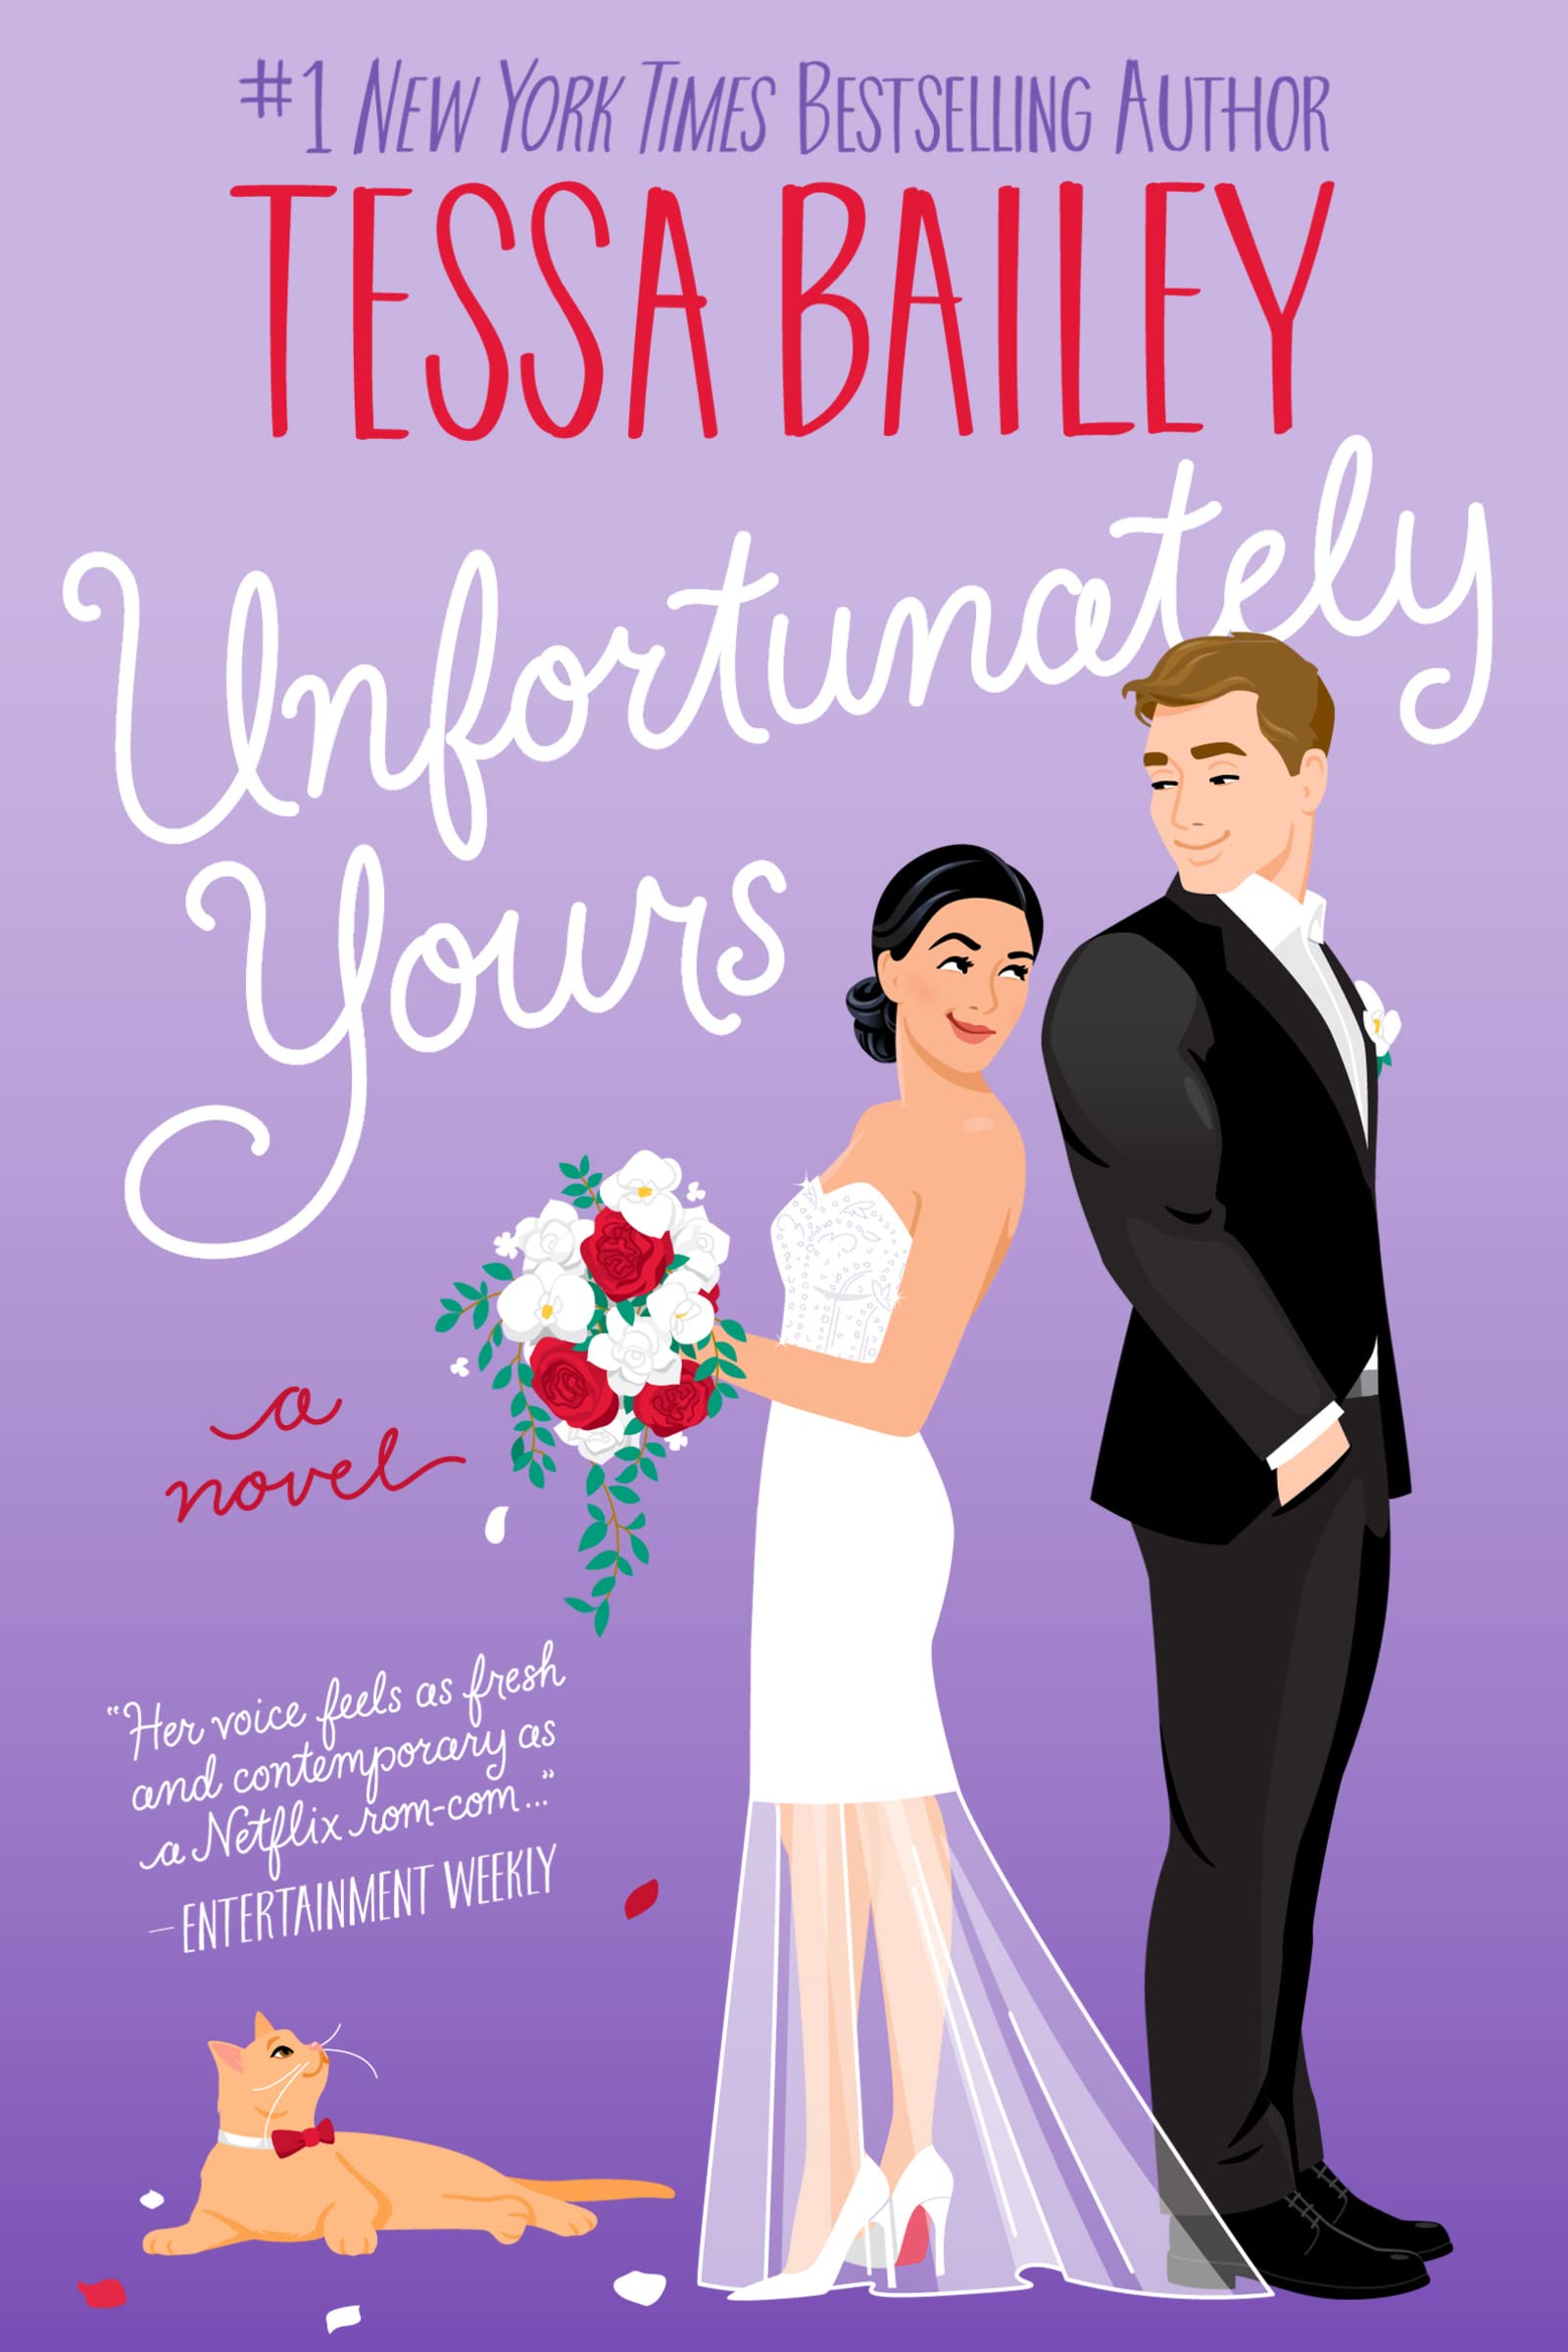 Image for "Unfortunately Yours"